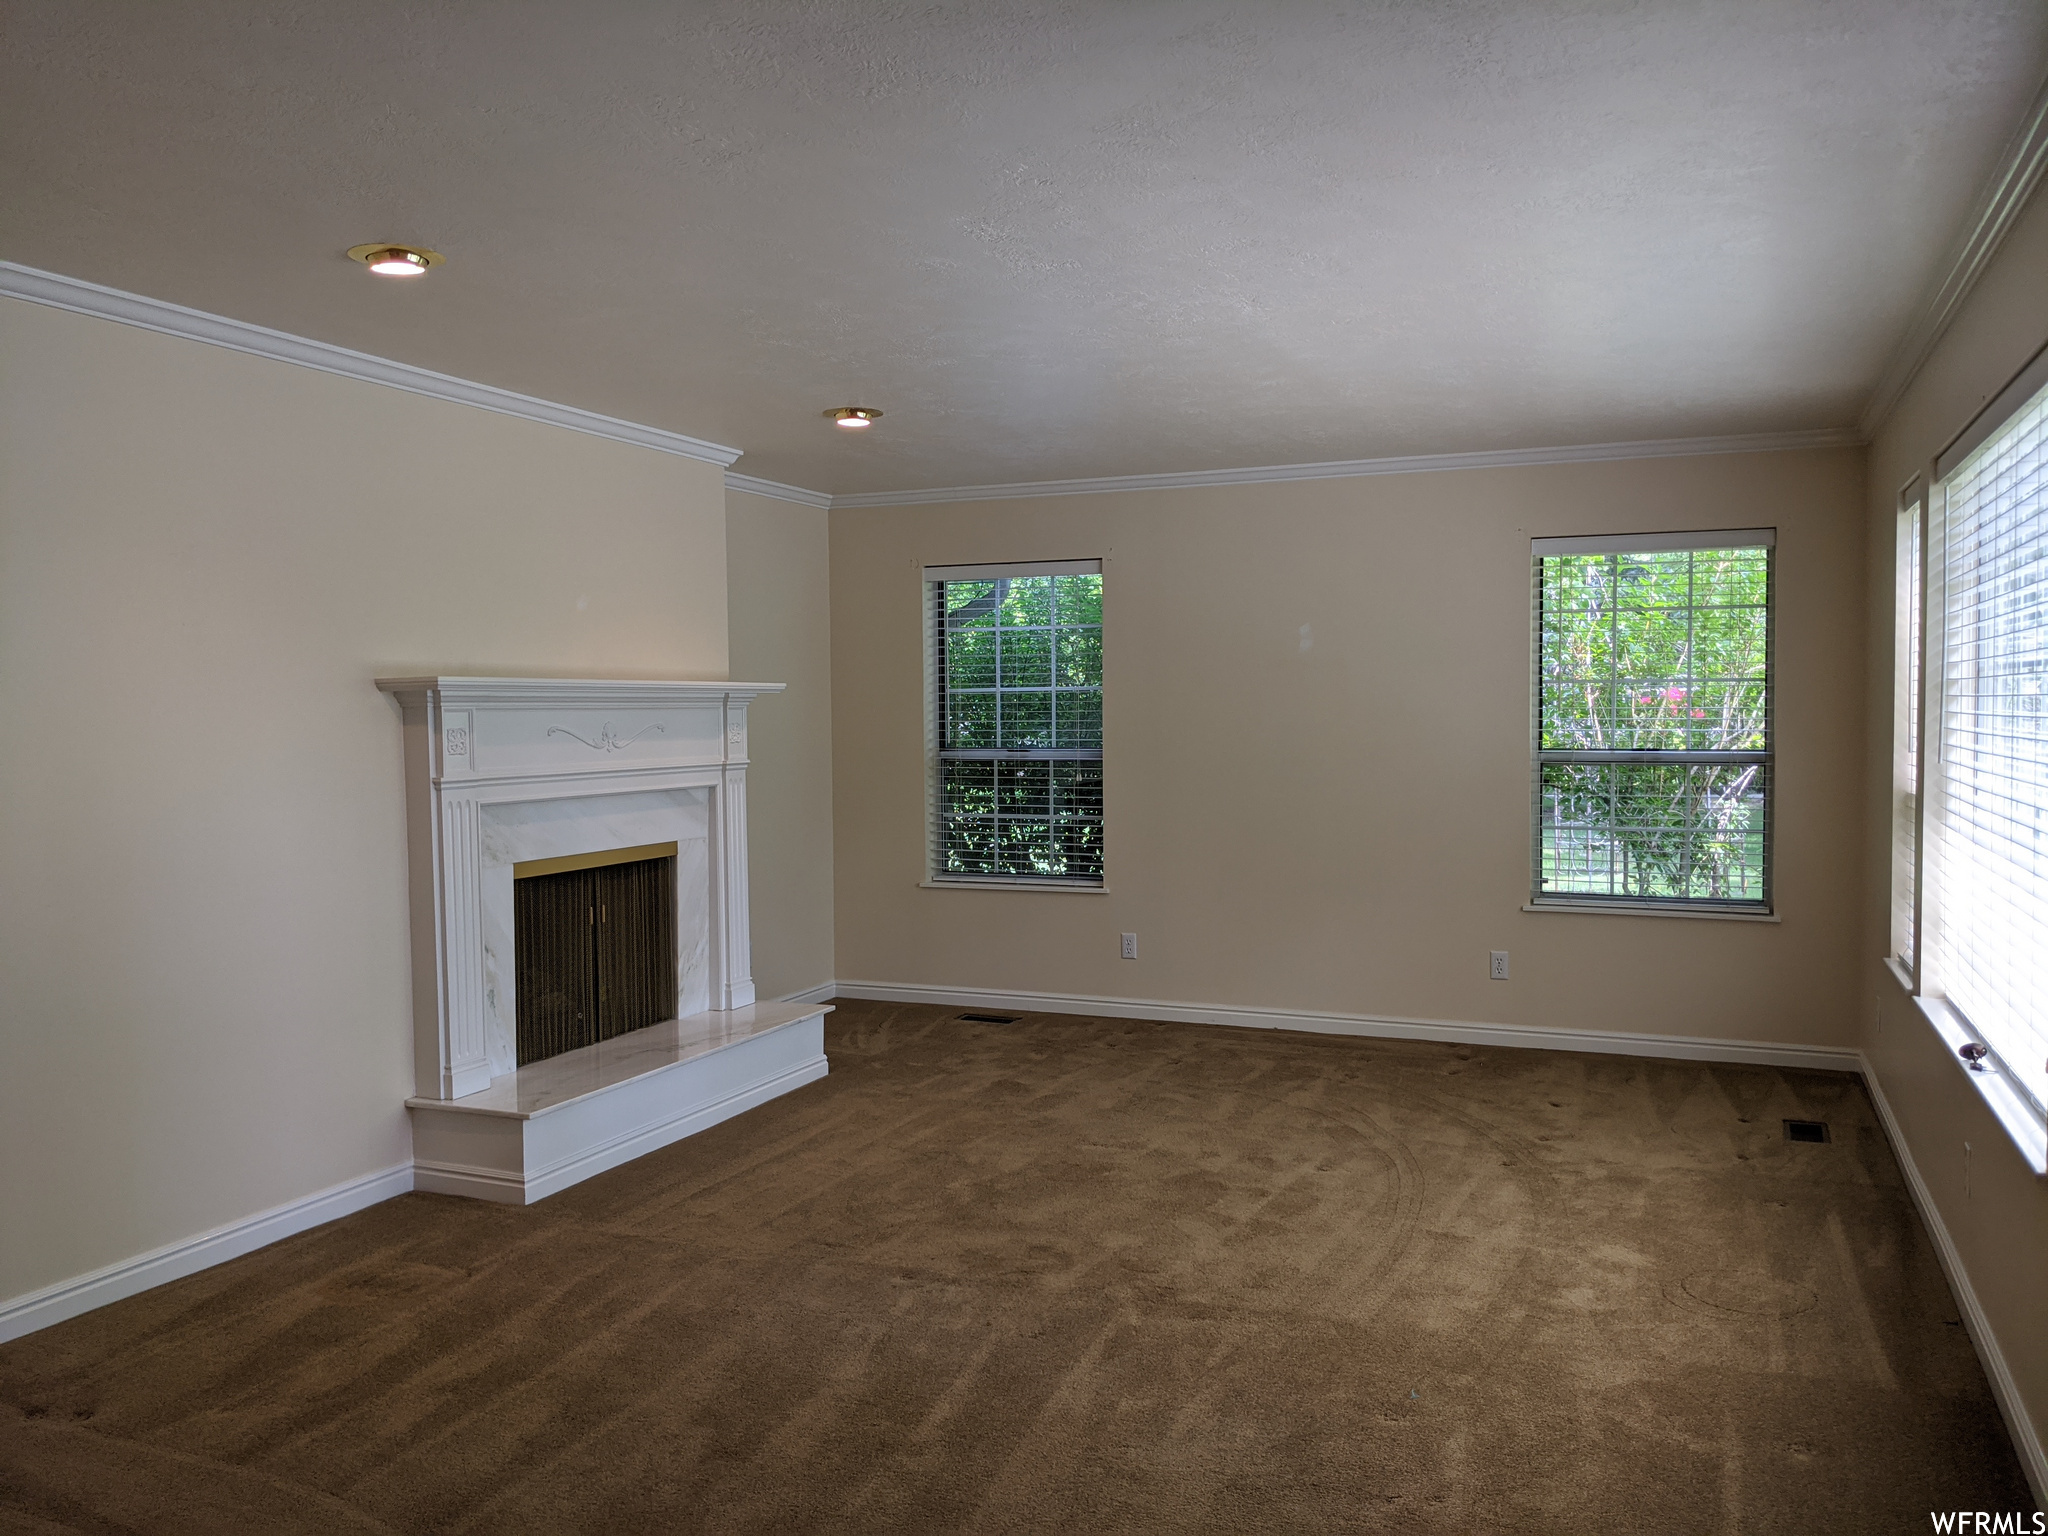 Living room with dark carpet, crown molding, a healthy amount of sunlight, and a fireplace